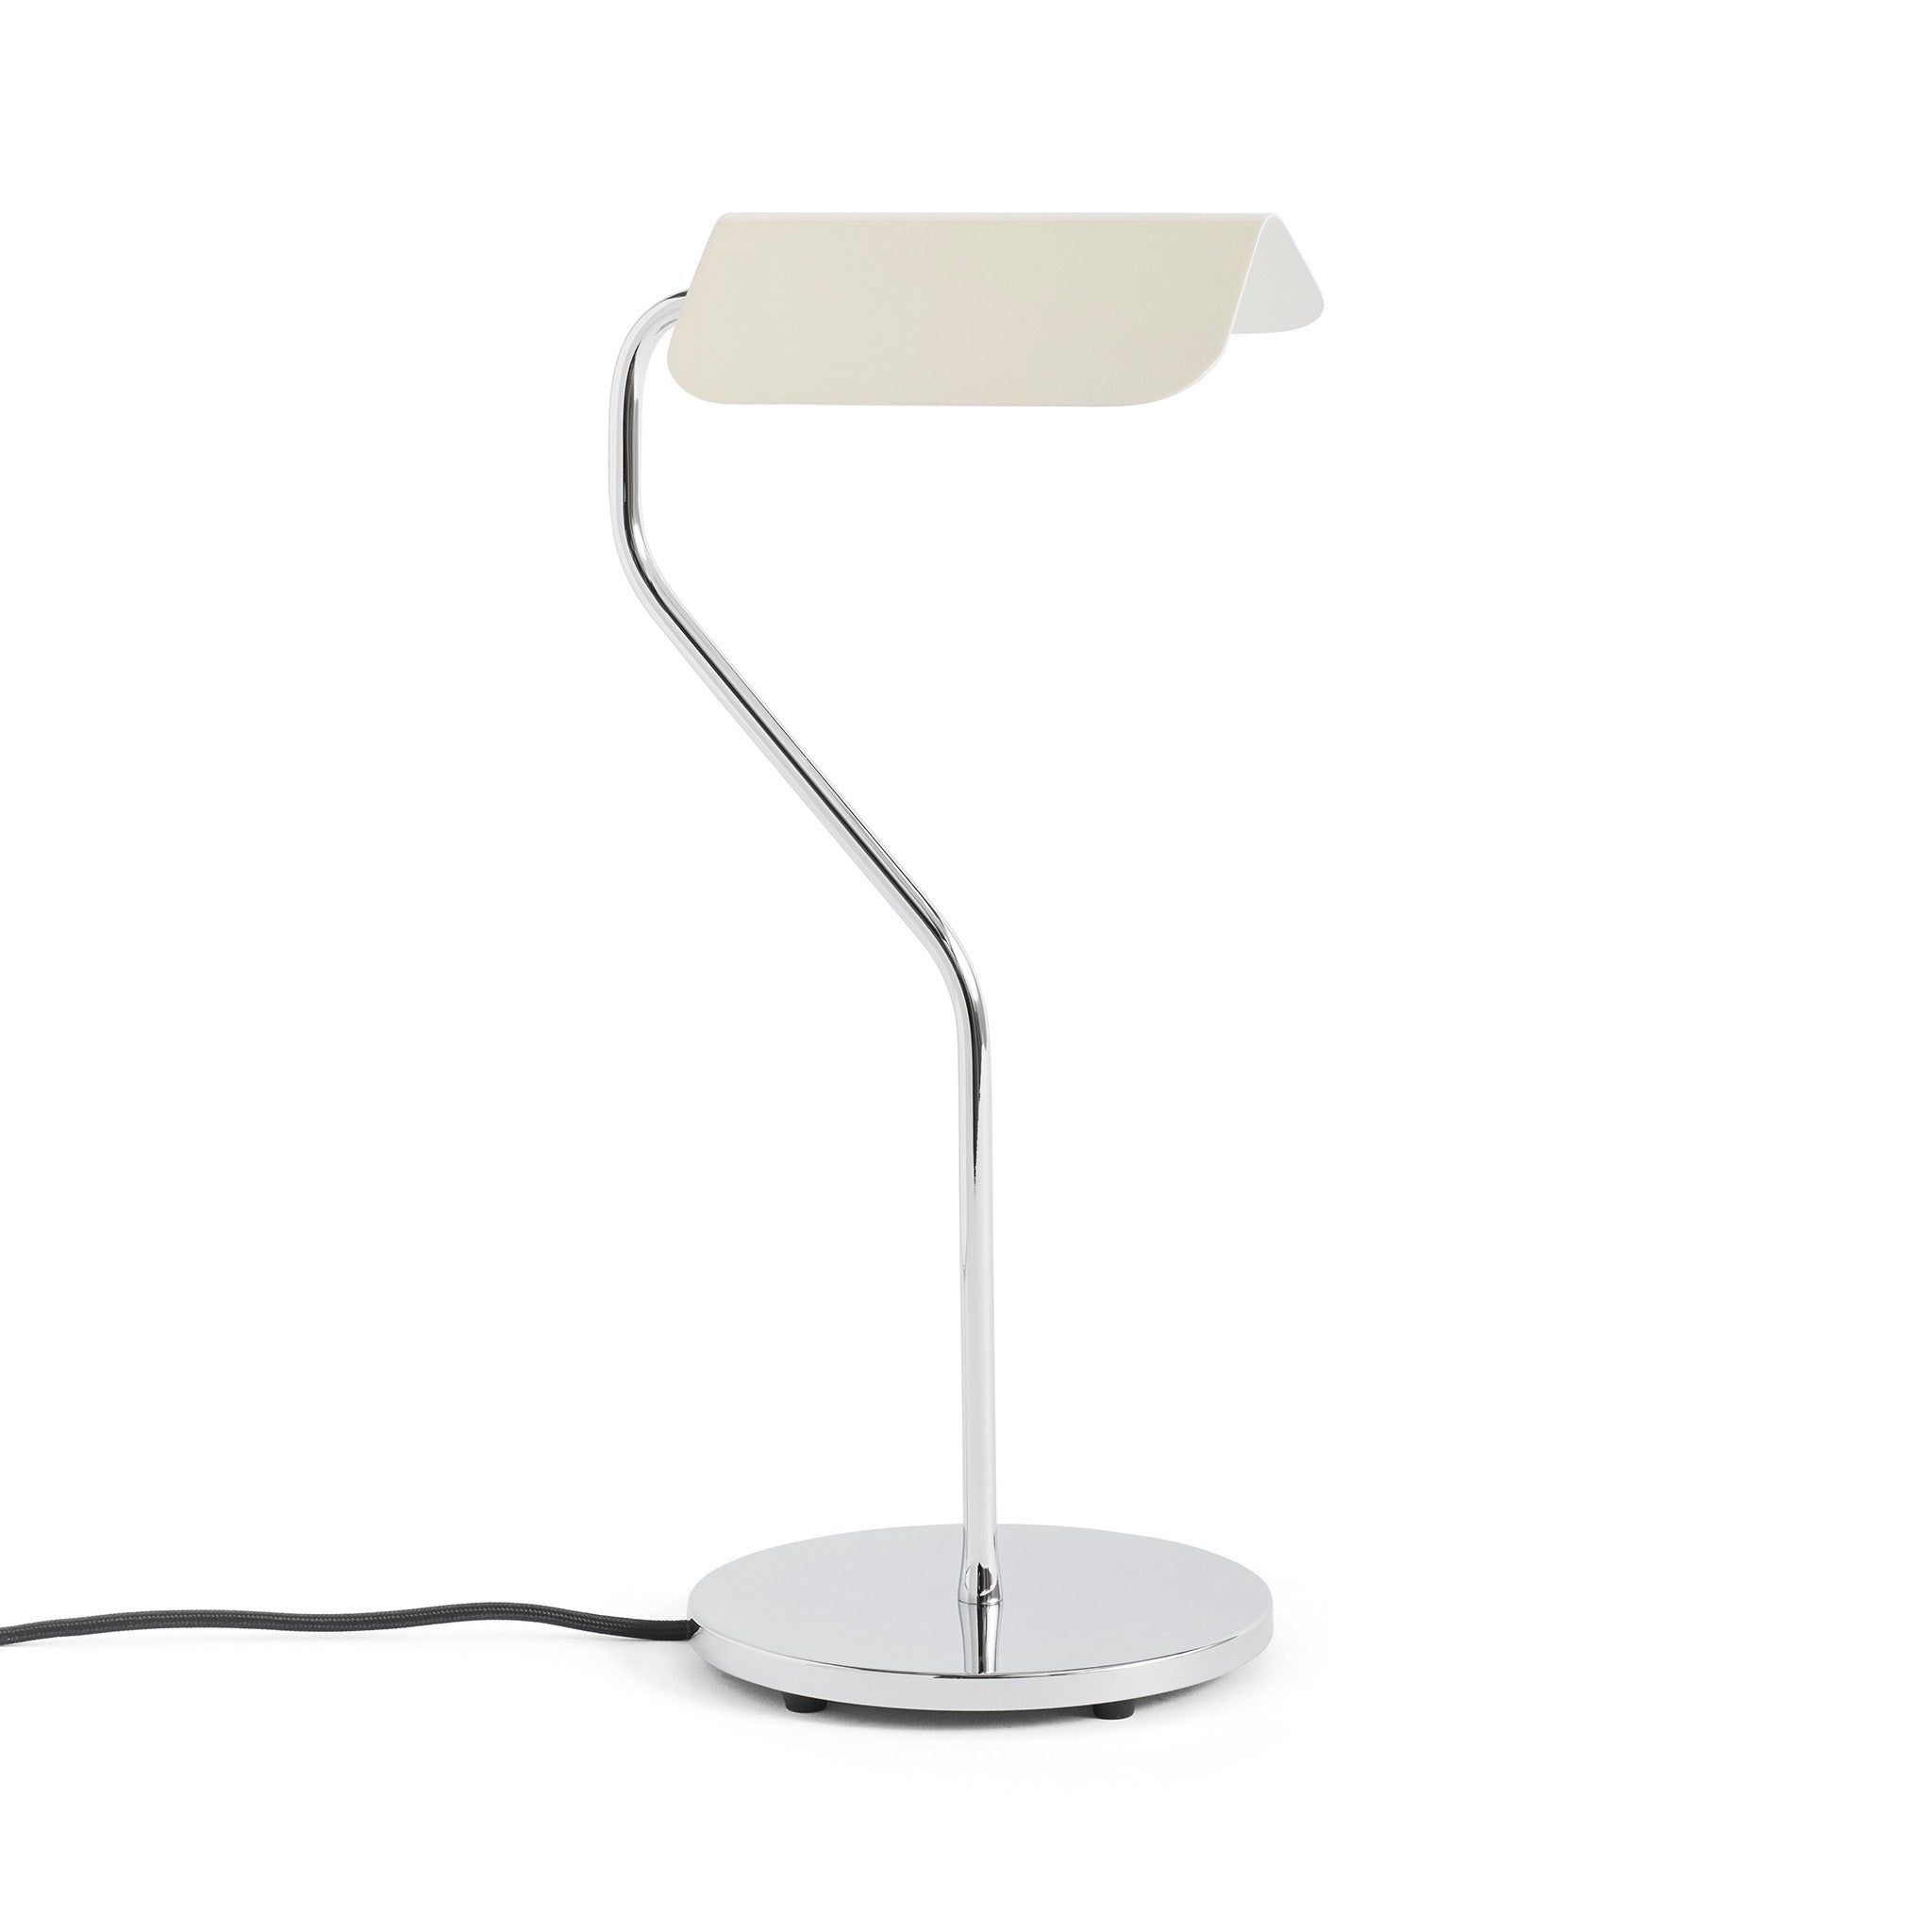 Apex Table Lamp By John Tree for Hay